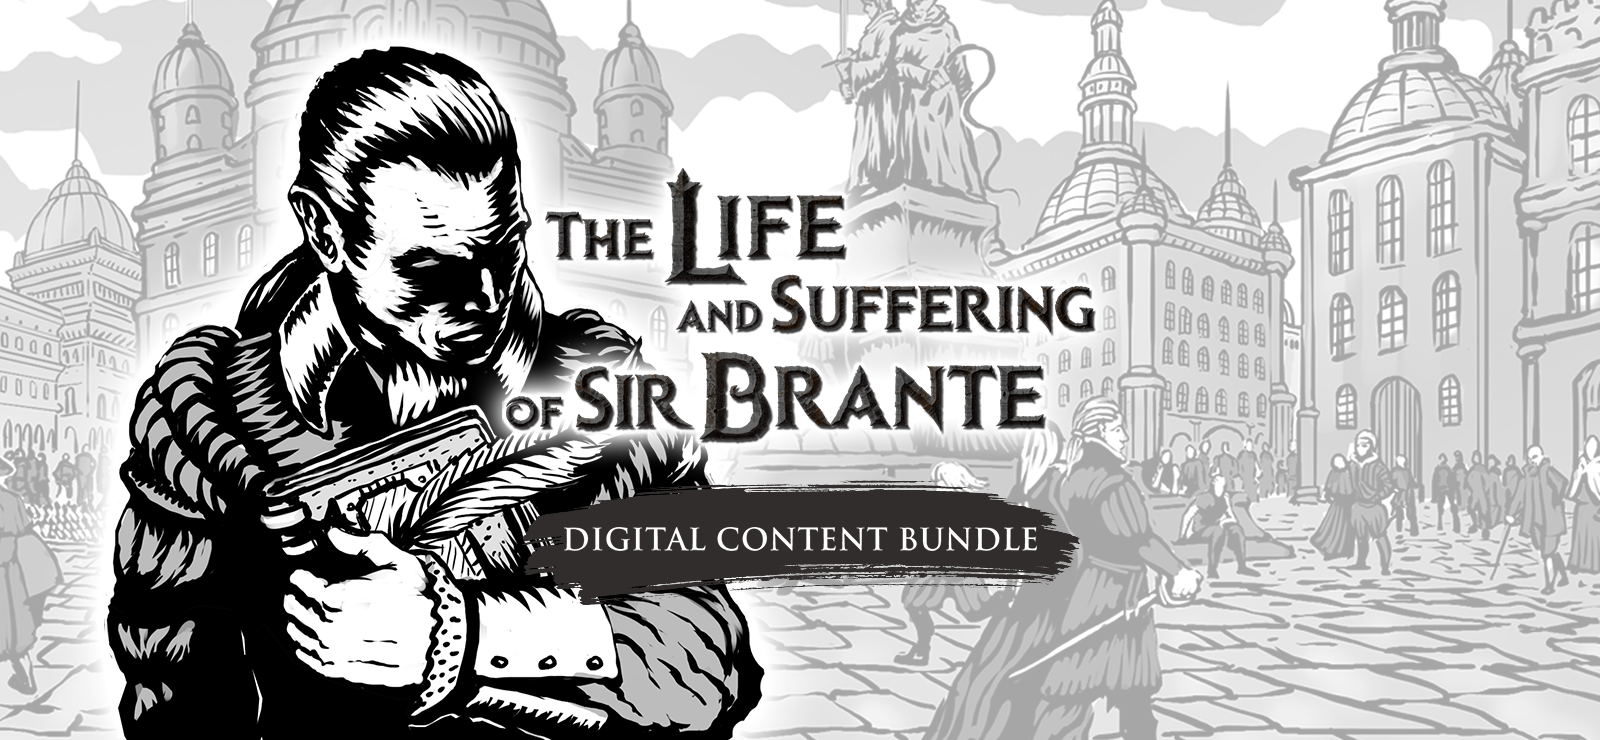 The Life And Suffering Of Sir Brante - Digital Content Bundle